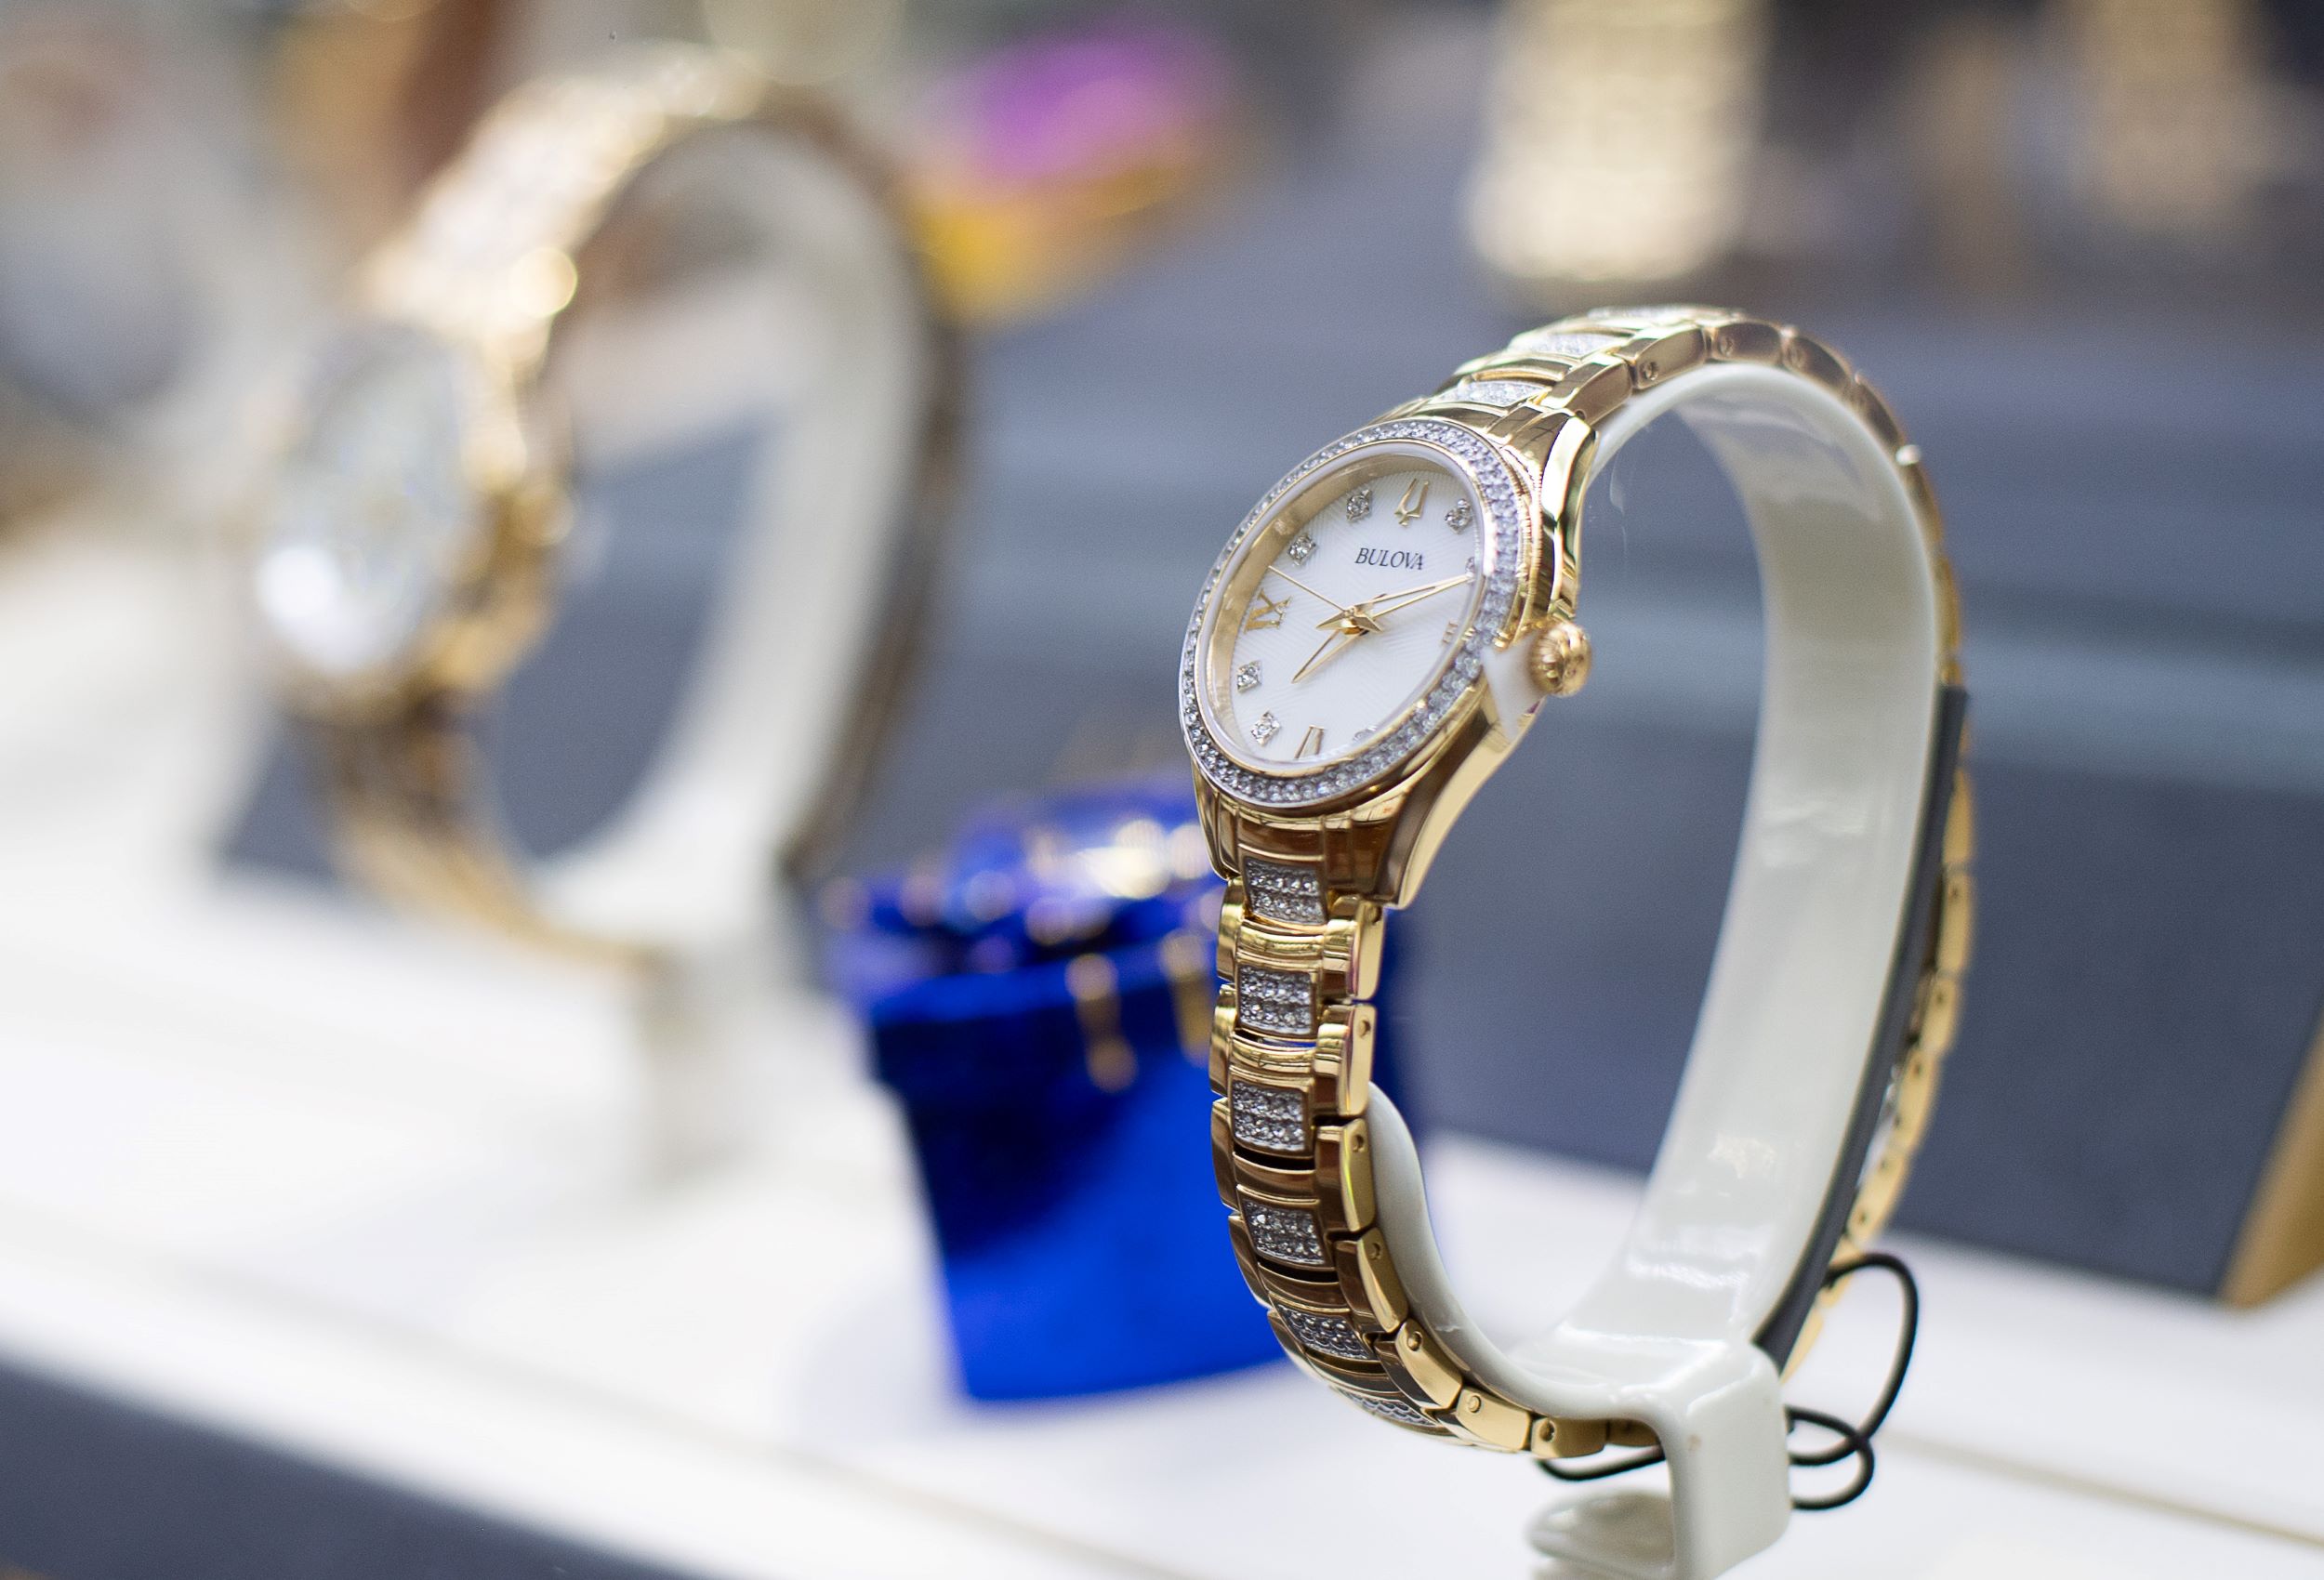 Two elegant wristwatches on display, one in the foreground focused with a golden band and white dial, and another slightly blurred in the background.